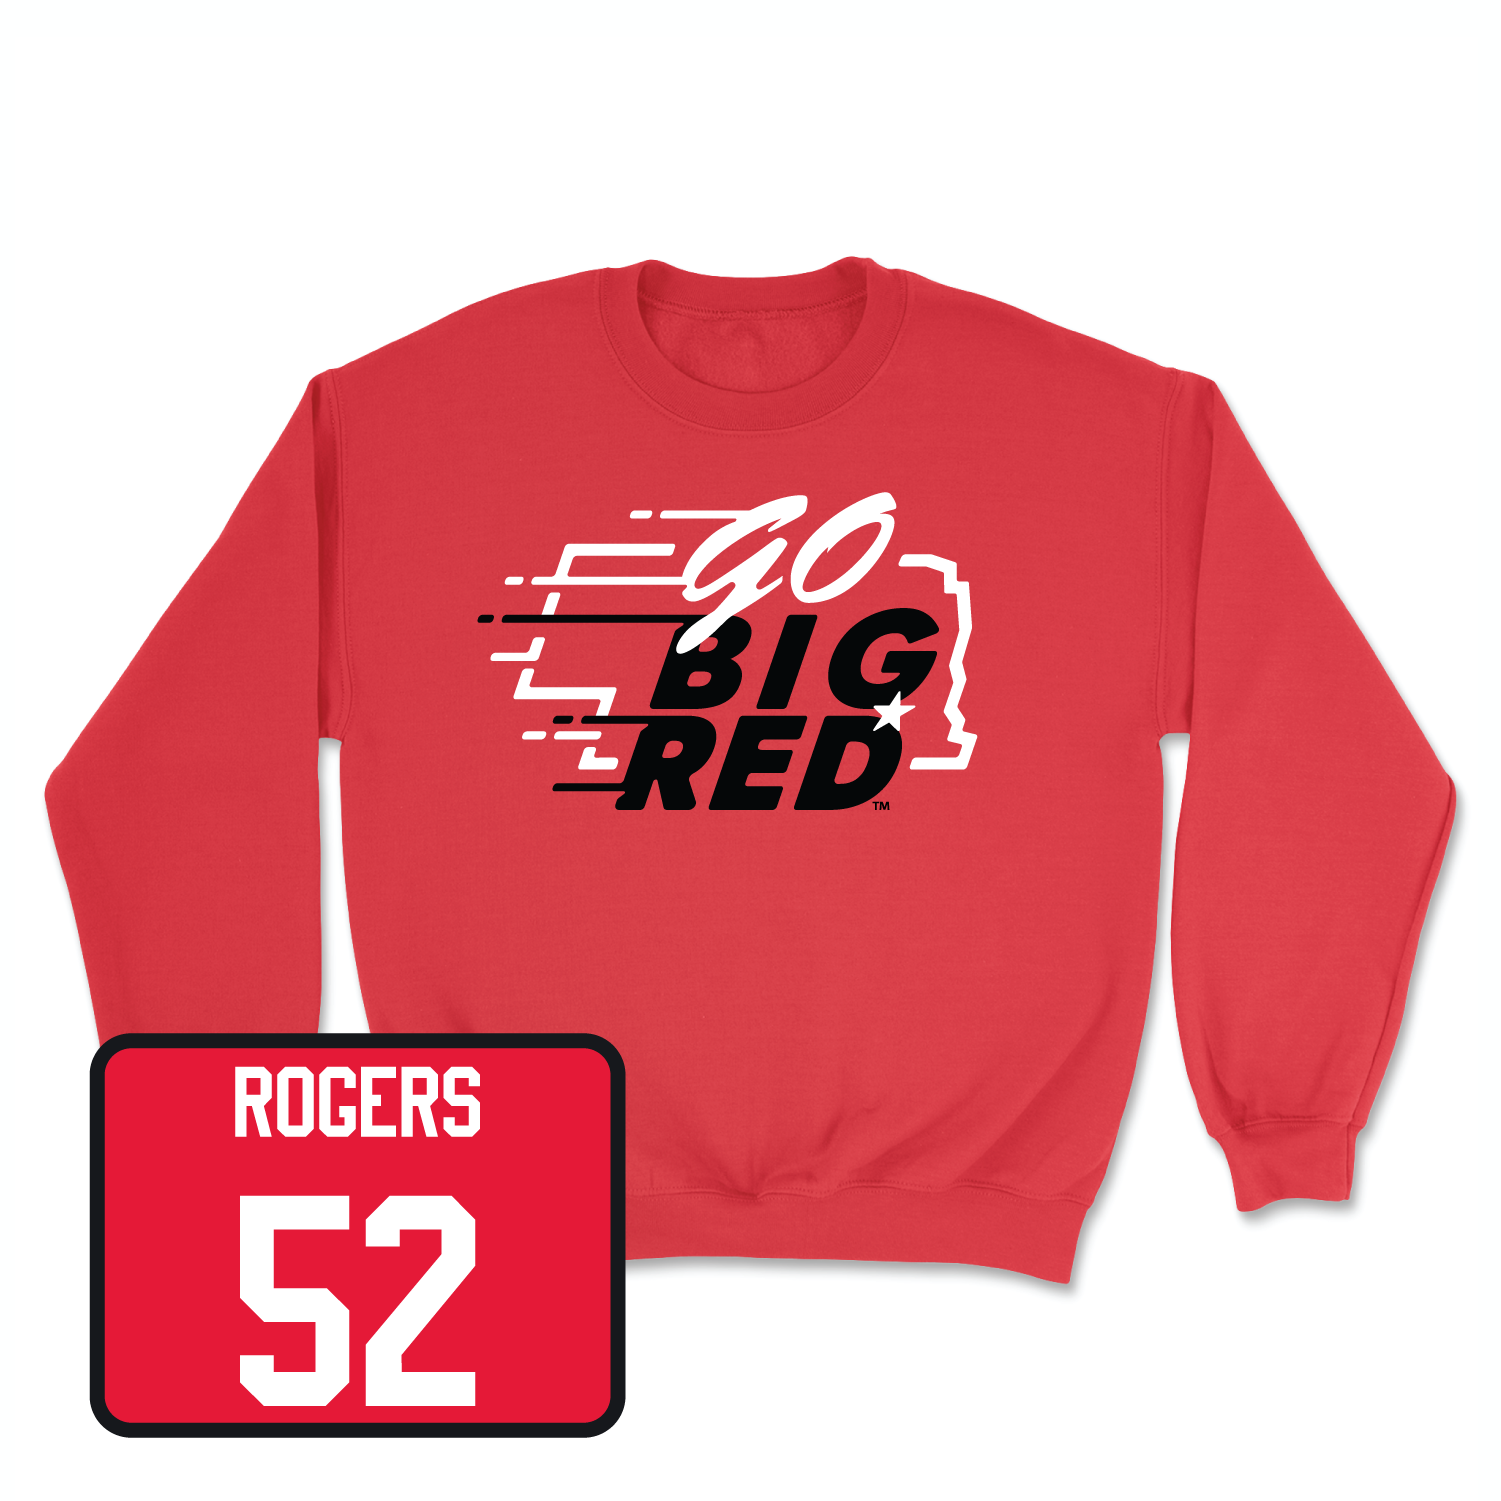 Red Football GBR Crew Youth Large / Dylan Rogers | #52